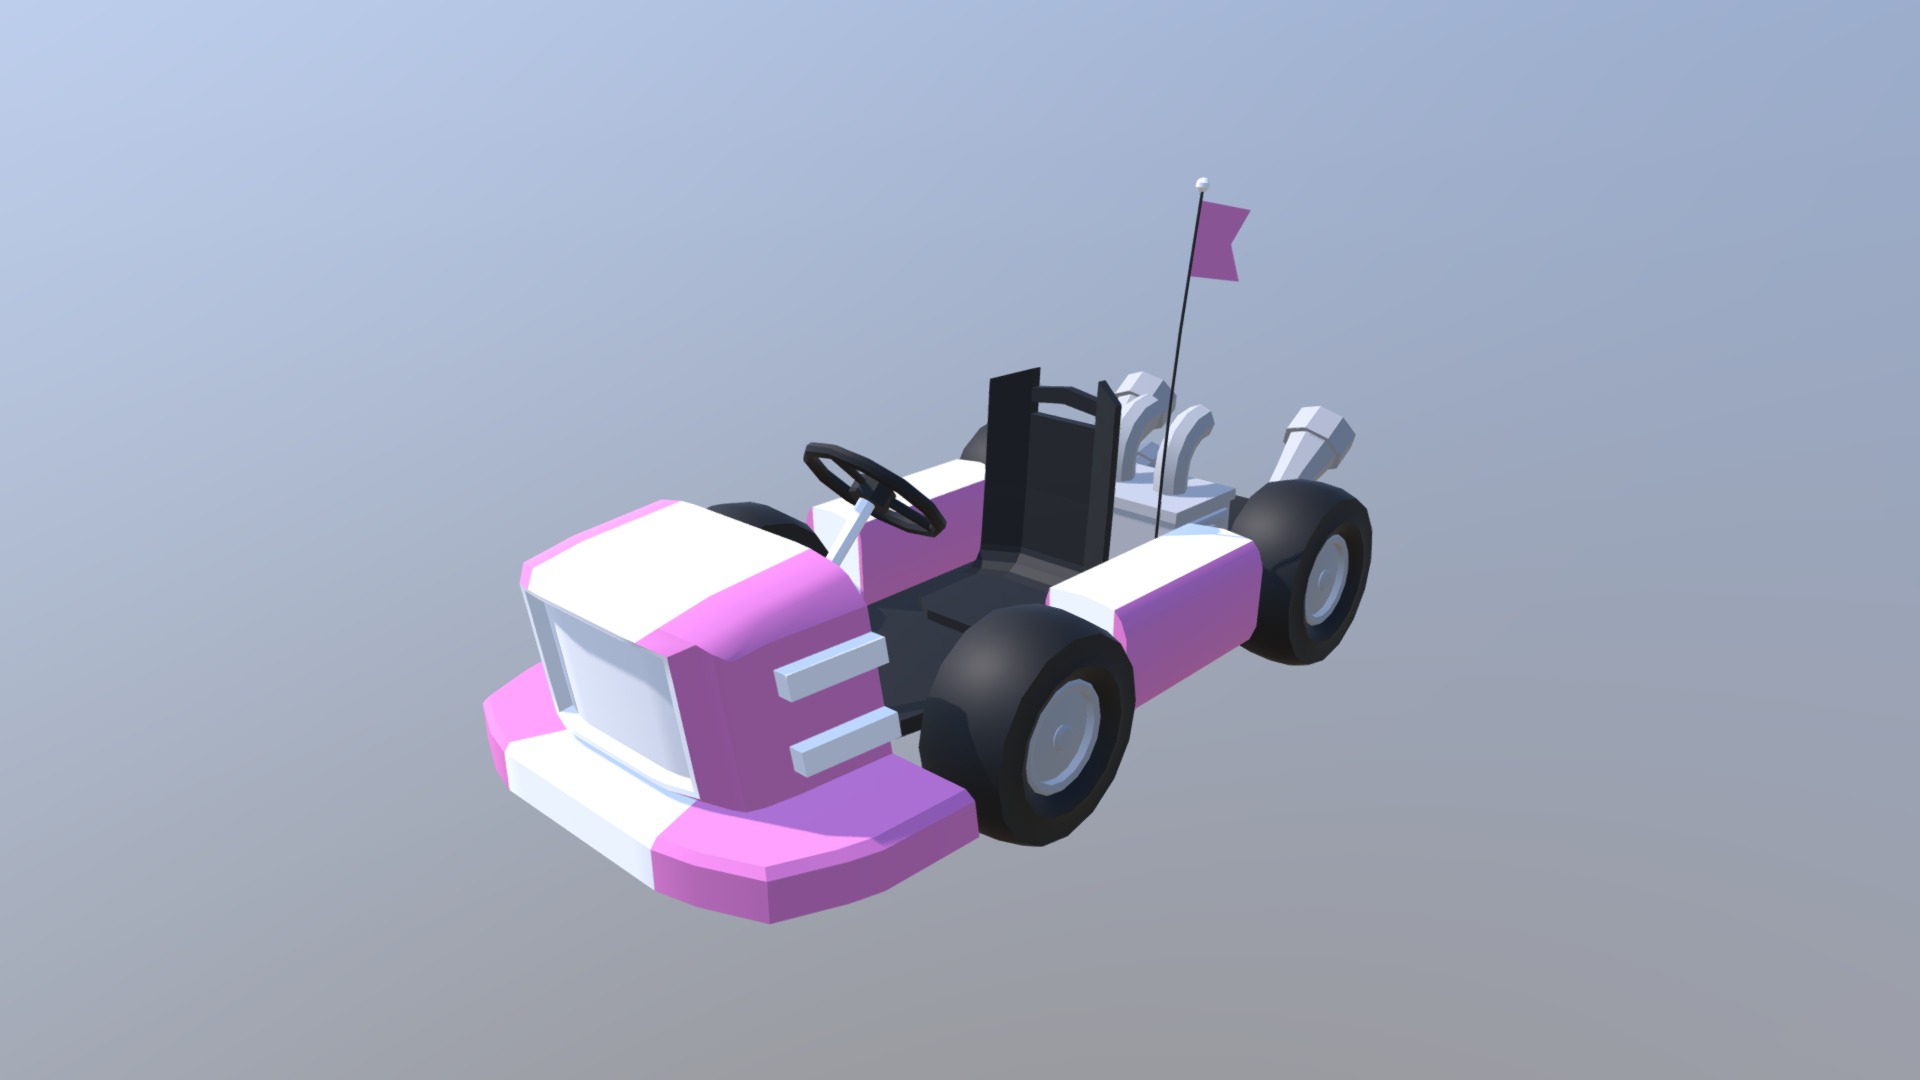 3D model Off Road Mini Kart 1 – Low Poly - This is a 3D model of the Off Road Mini Kart 1 - Low Poly. The 3D model is about a pink and purple toy car.